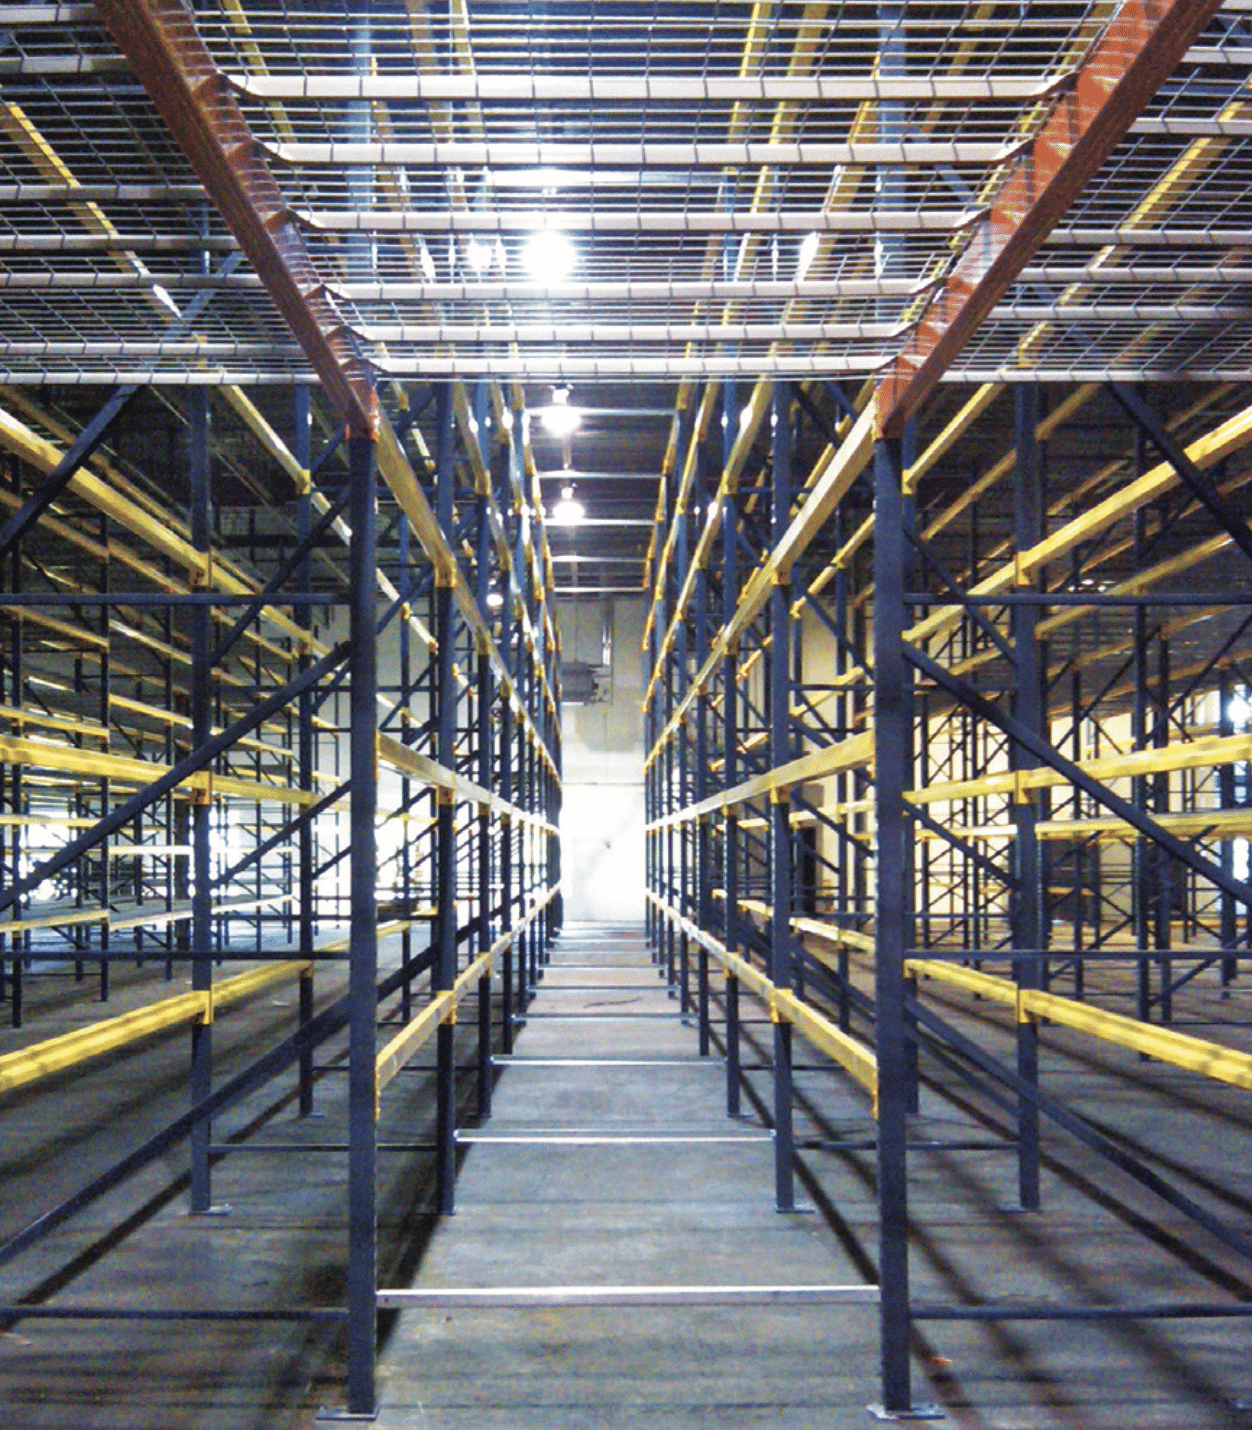 Atlantic designed a state-of-the-art versatile racking system